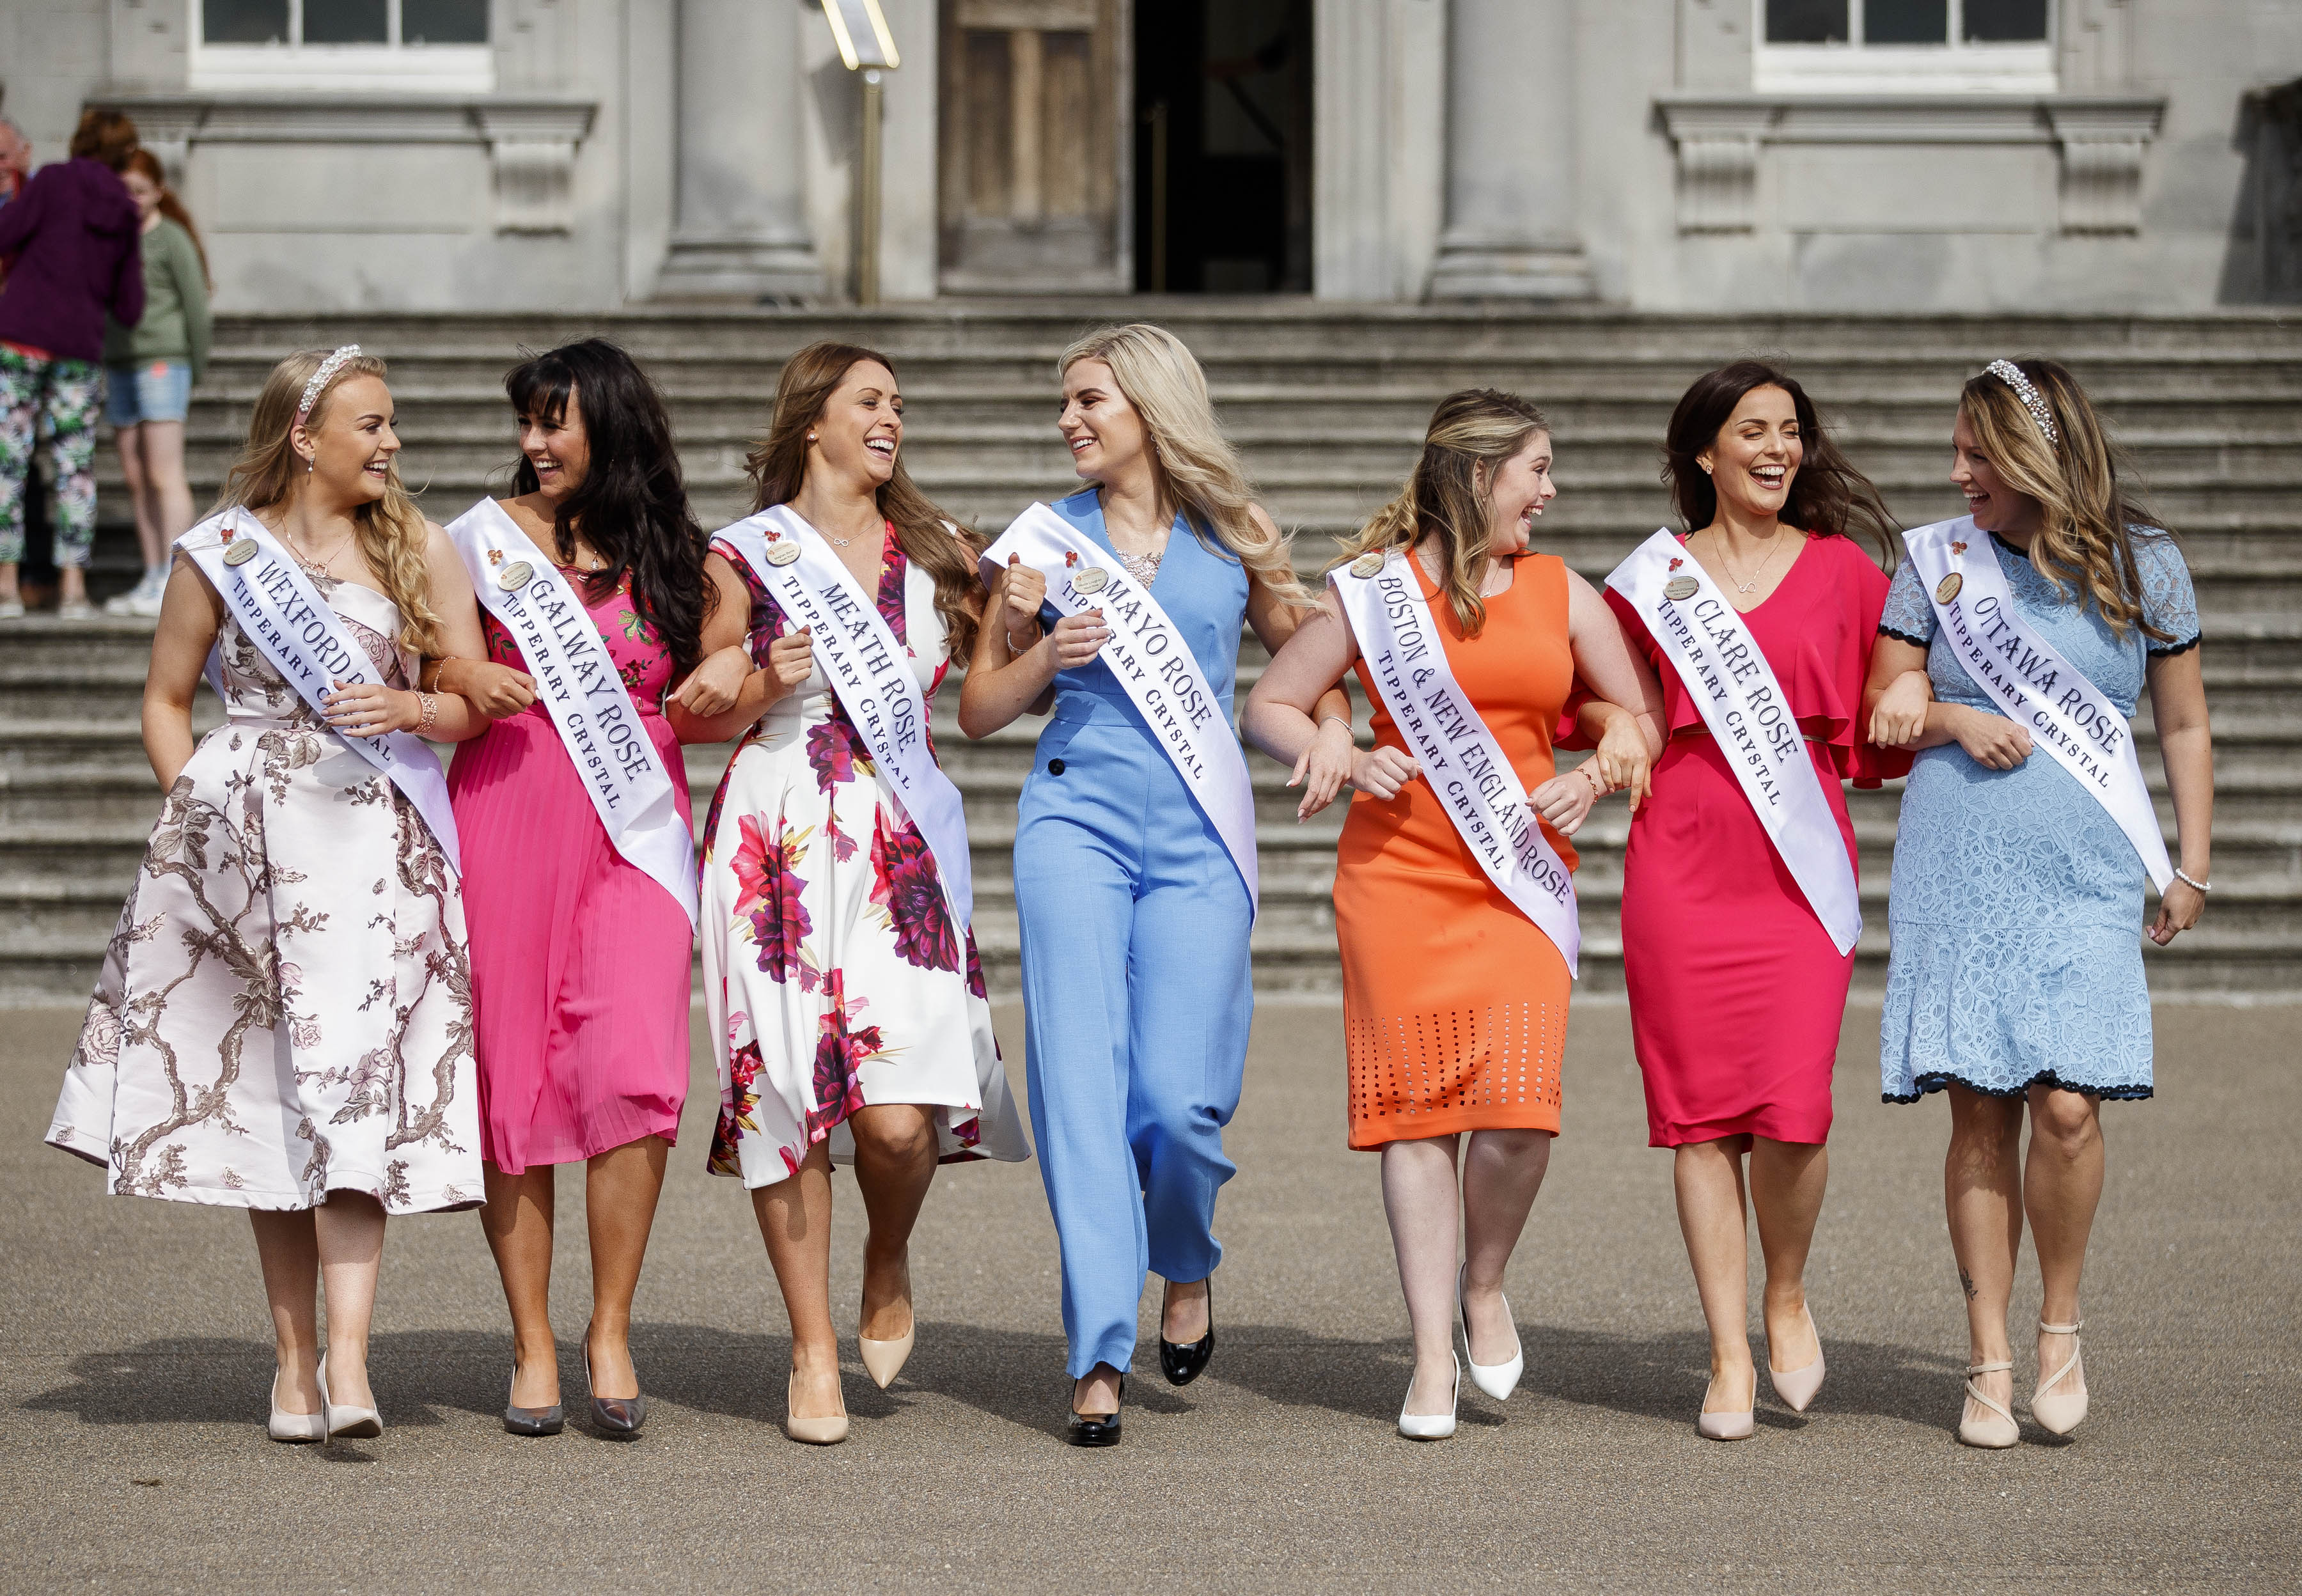 Meet the final contestants ahead of tonight’s Rose of Tralee finale